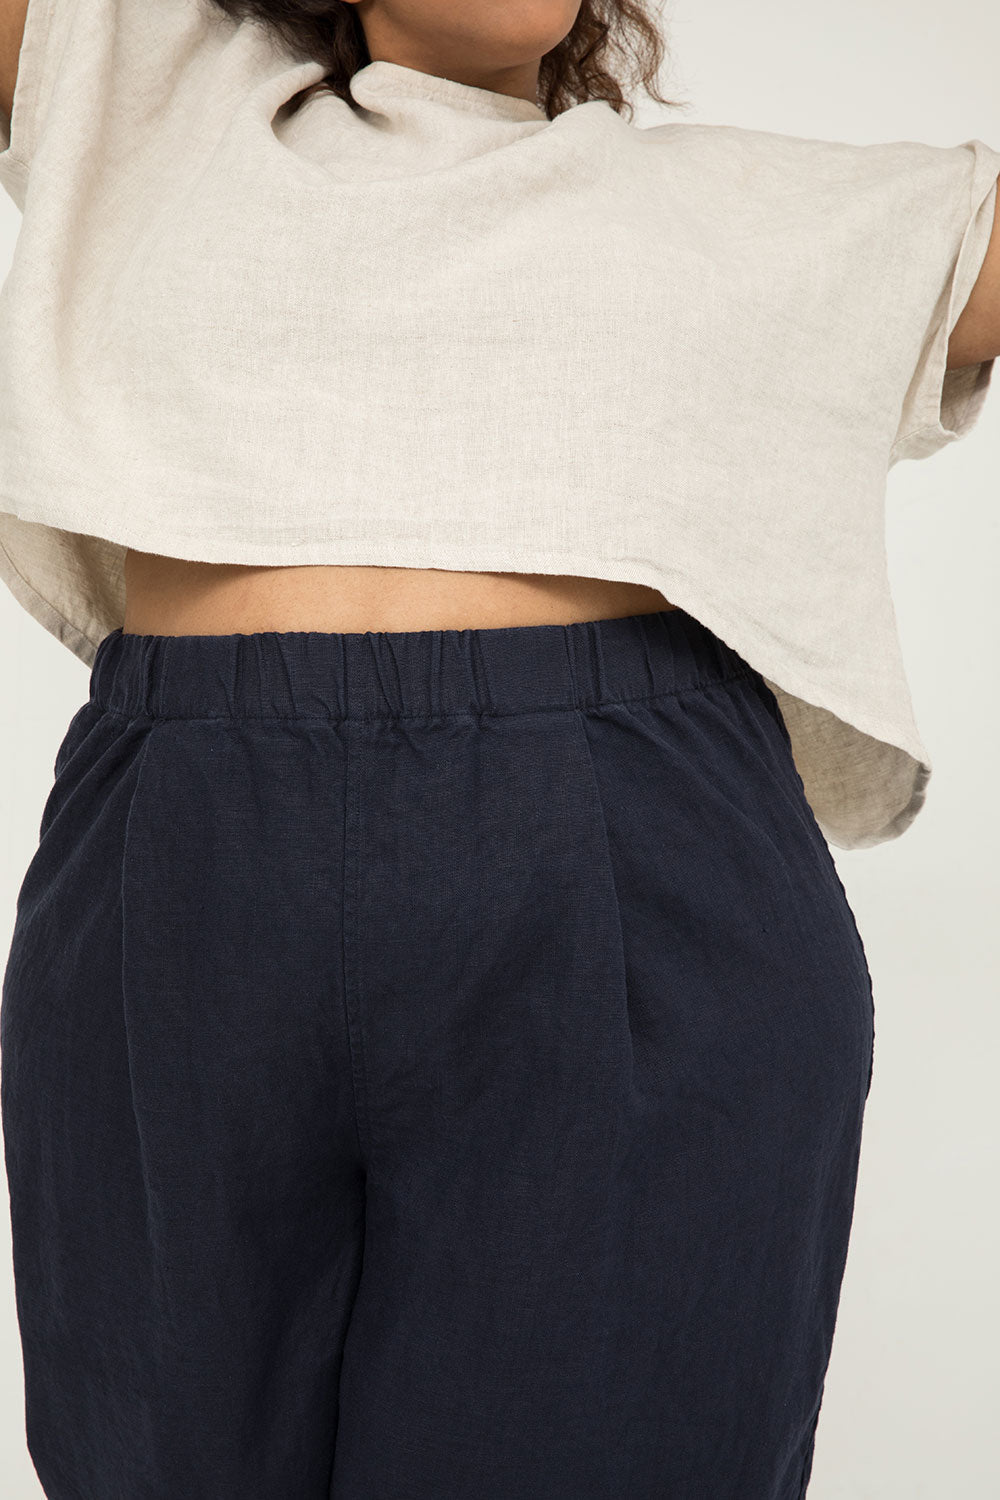 Andy Trouser in Midweight Linen Navy#color_navy